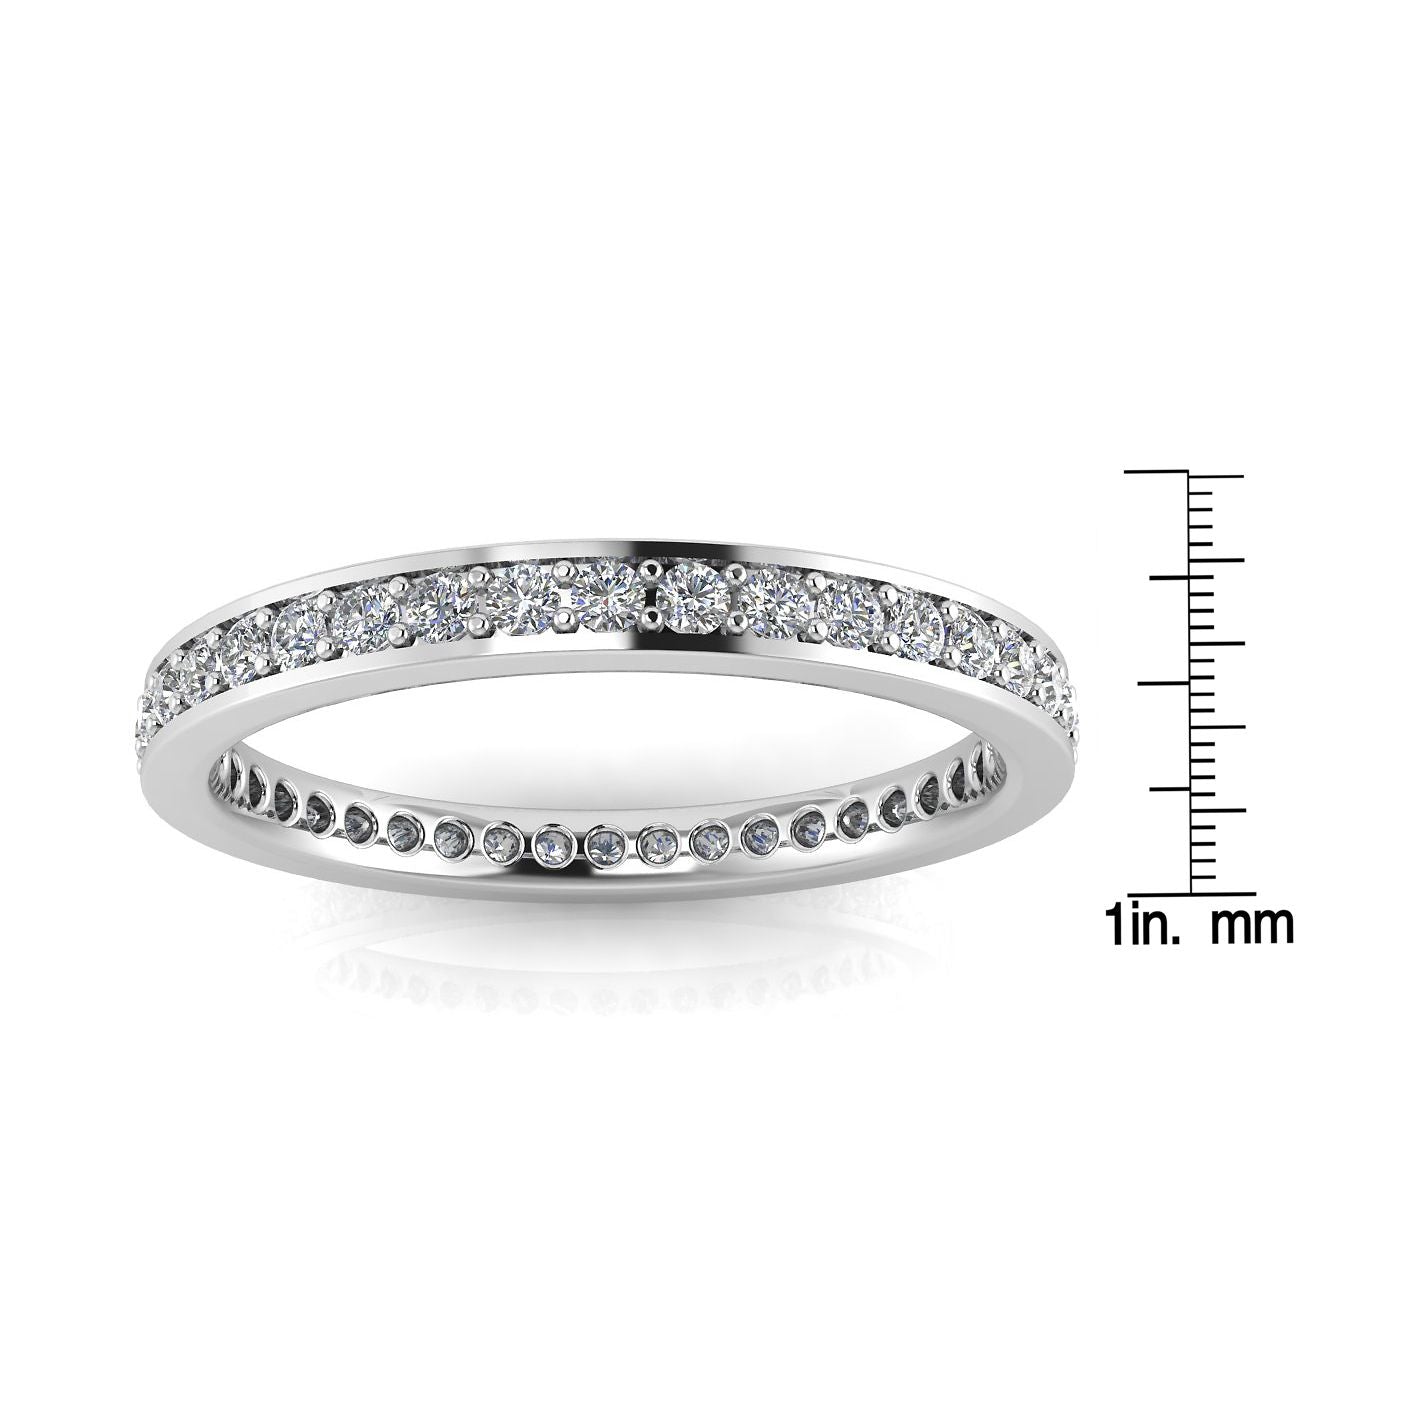 Round Brilliant Cut Diamond Channel Pave Set Eternity Ring In Platinum  (0.96ct. Tw.) Ring Size 6.5